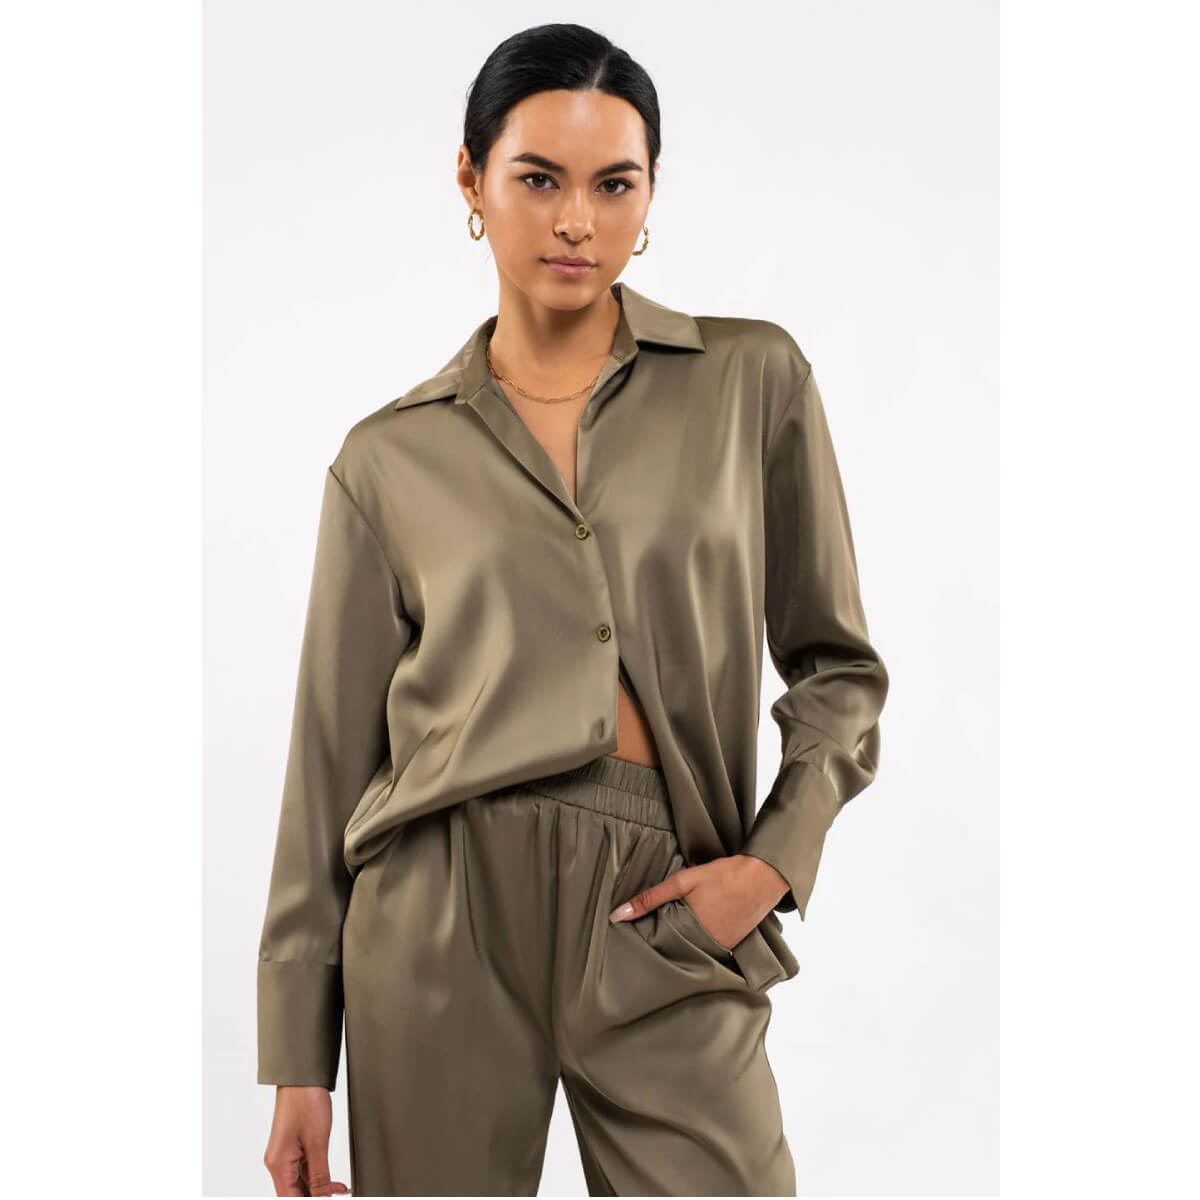 Solid Stain Button Up Blouse olive front | MILK MONEY milkmoney.co | cute tops for women. trendy tops for women. cute blouses for women. stylish tops for women. pretty womens tops. 